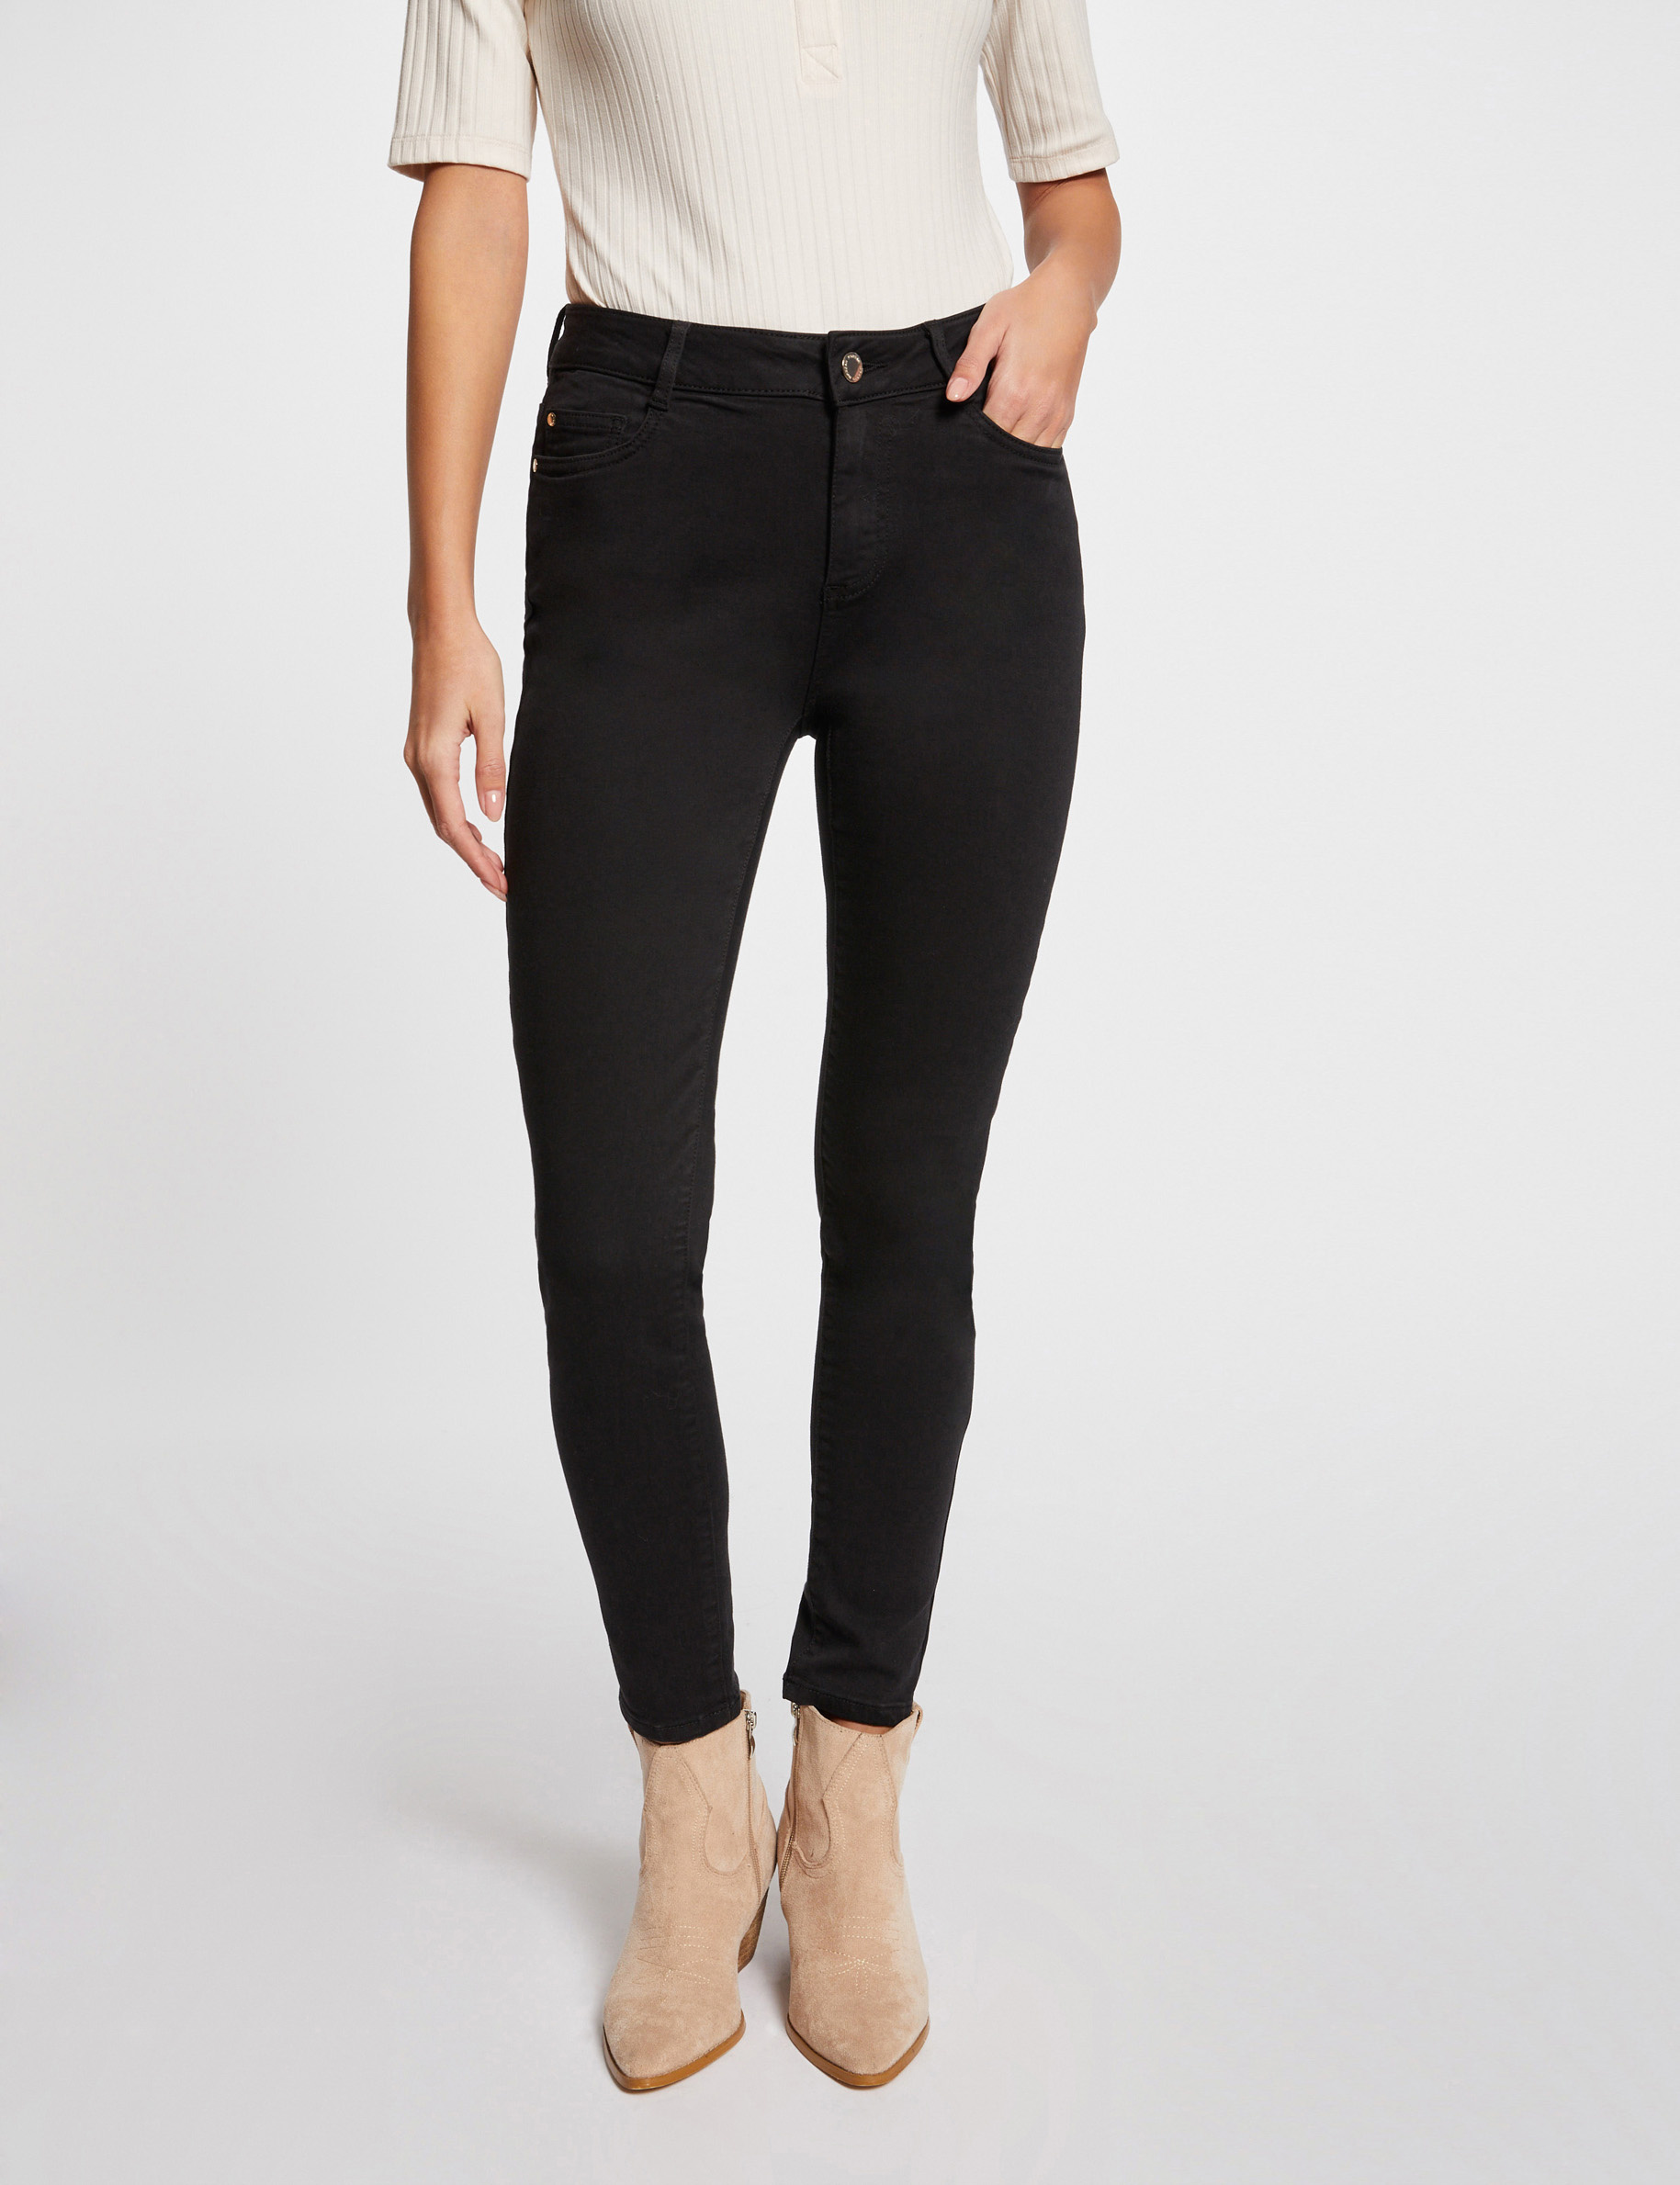 Cropped skinny trousers with 5 pockets black ladies'